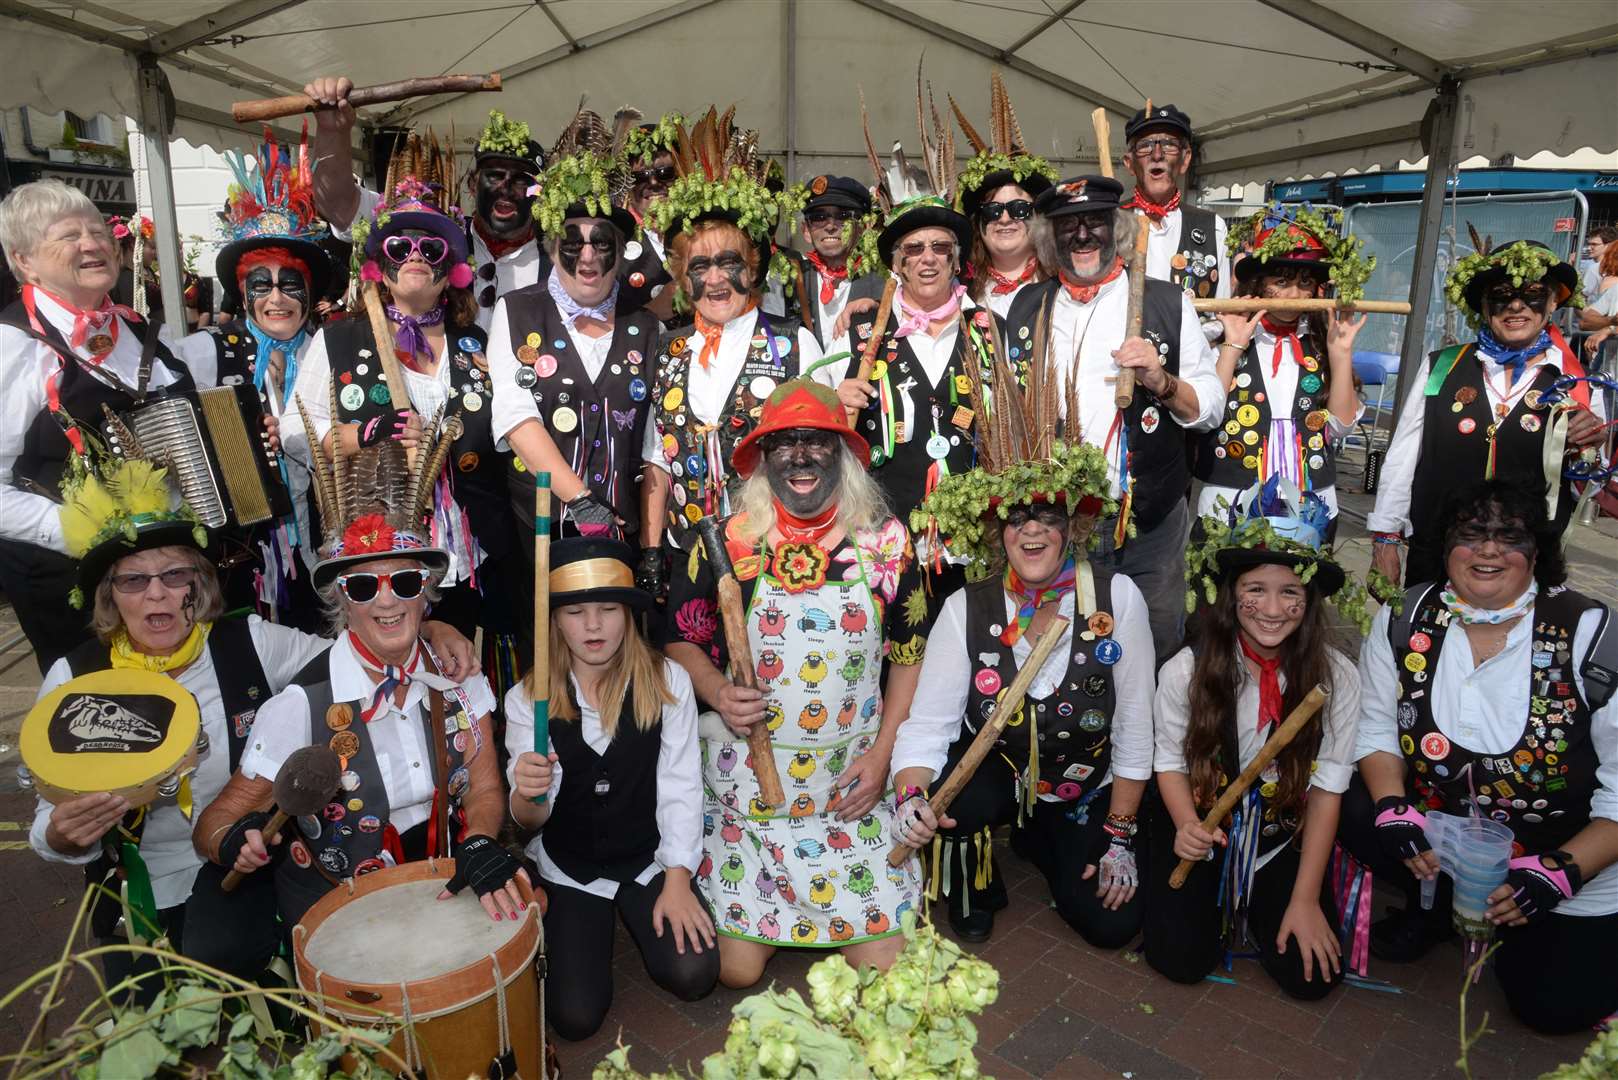 Dead Horse Morris entertaining at last year's event. Picture: Chris Davey